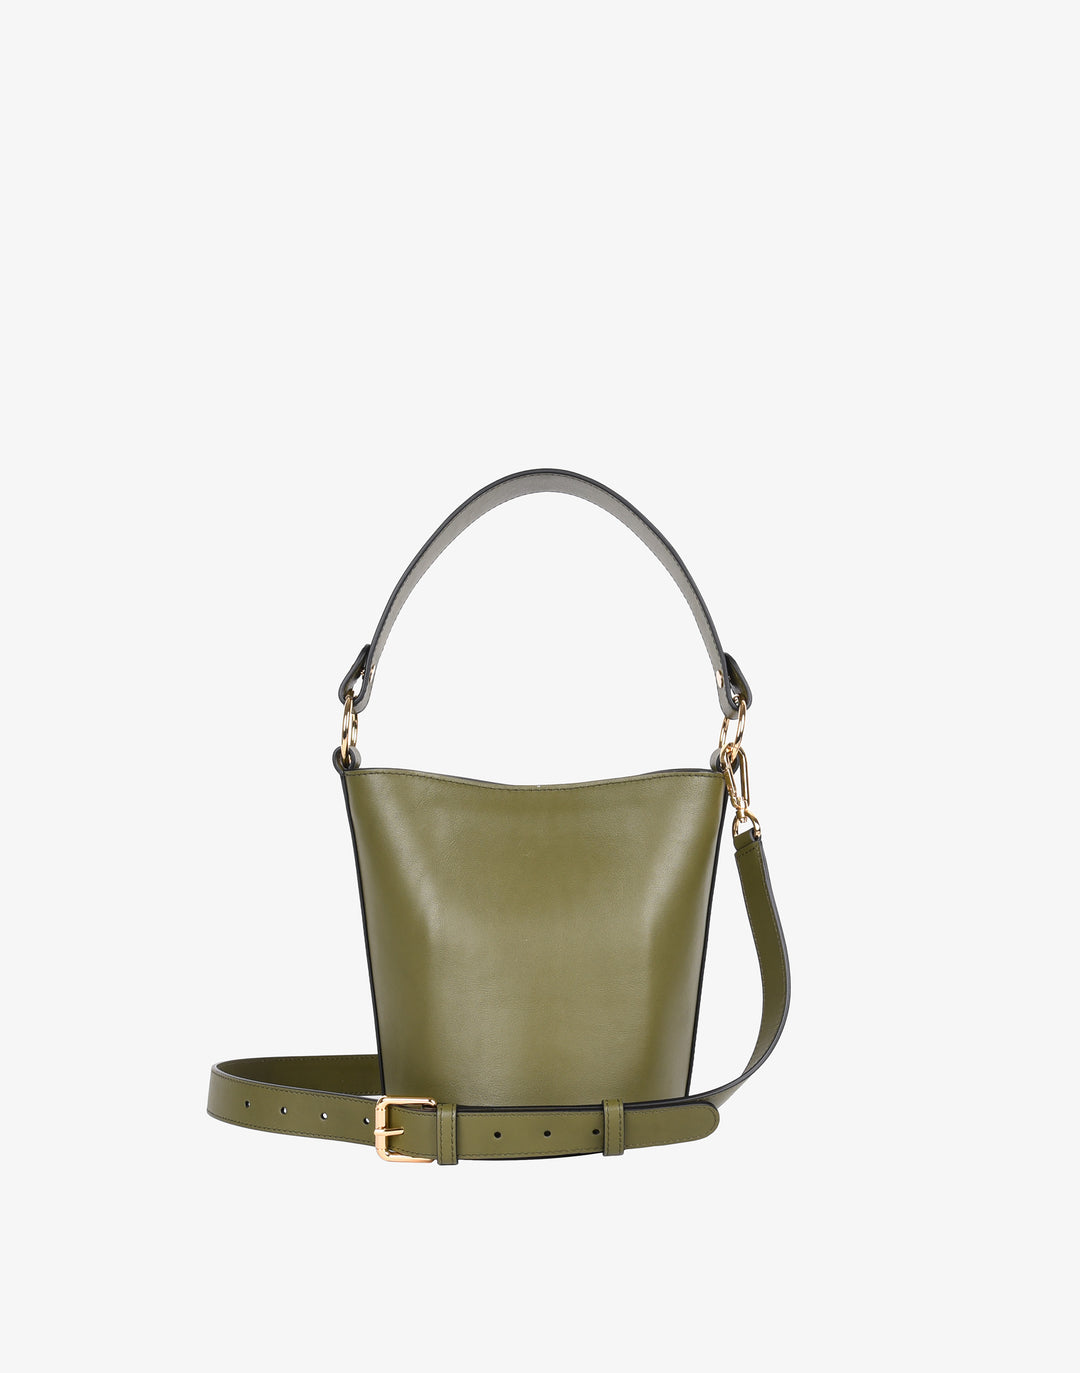 Coach - Cream & Lime Green Colorblocked Saddle-Style Convertible